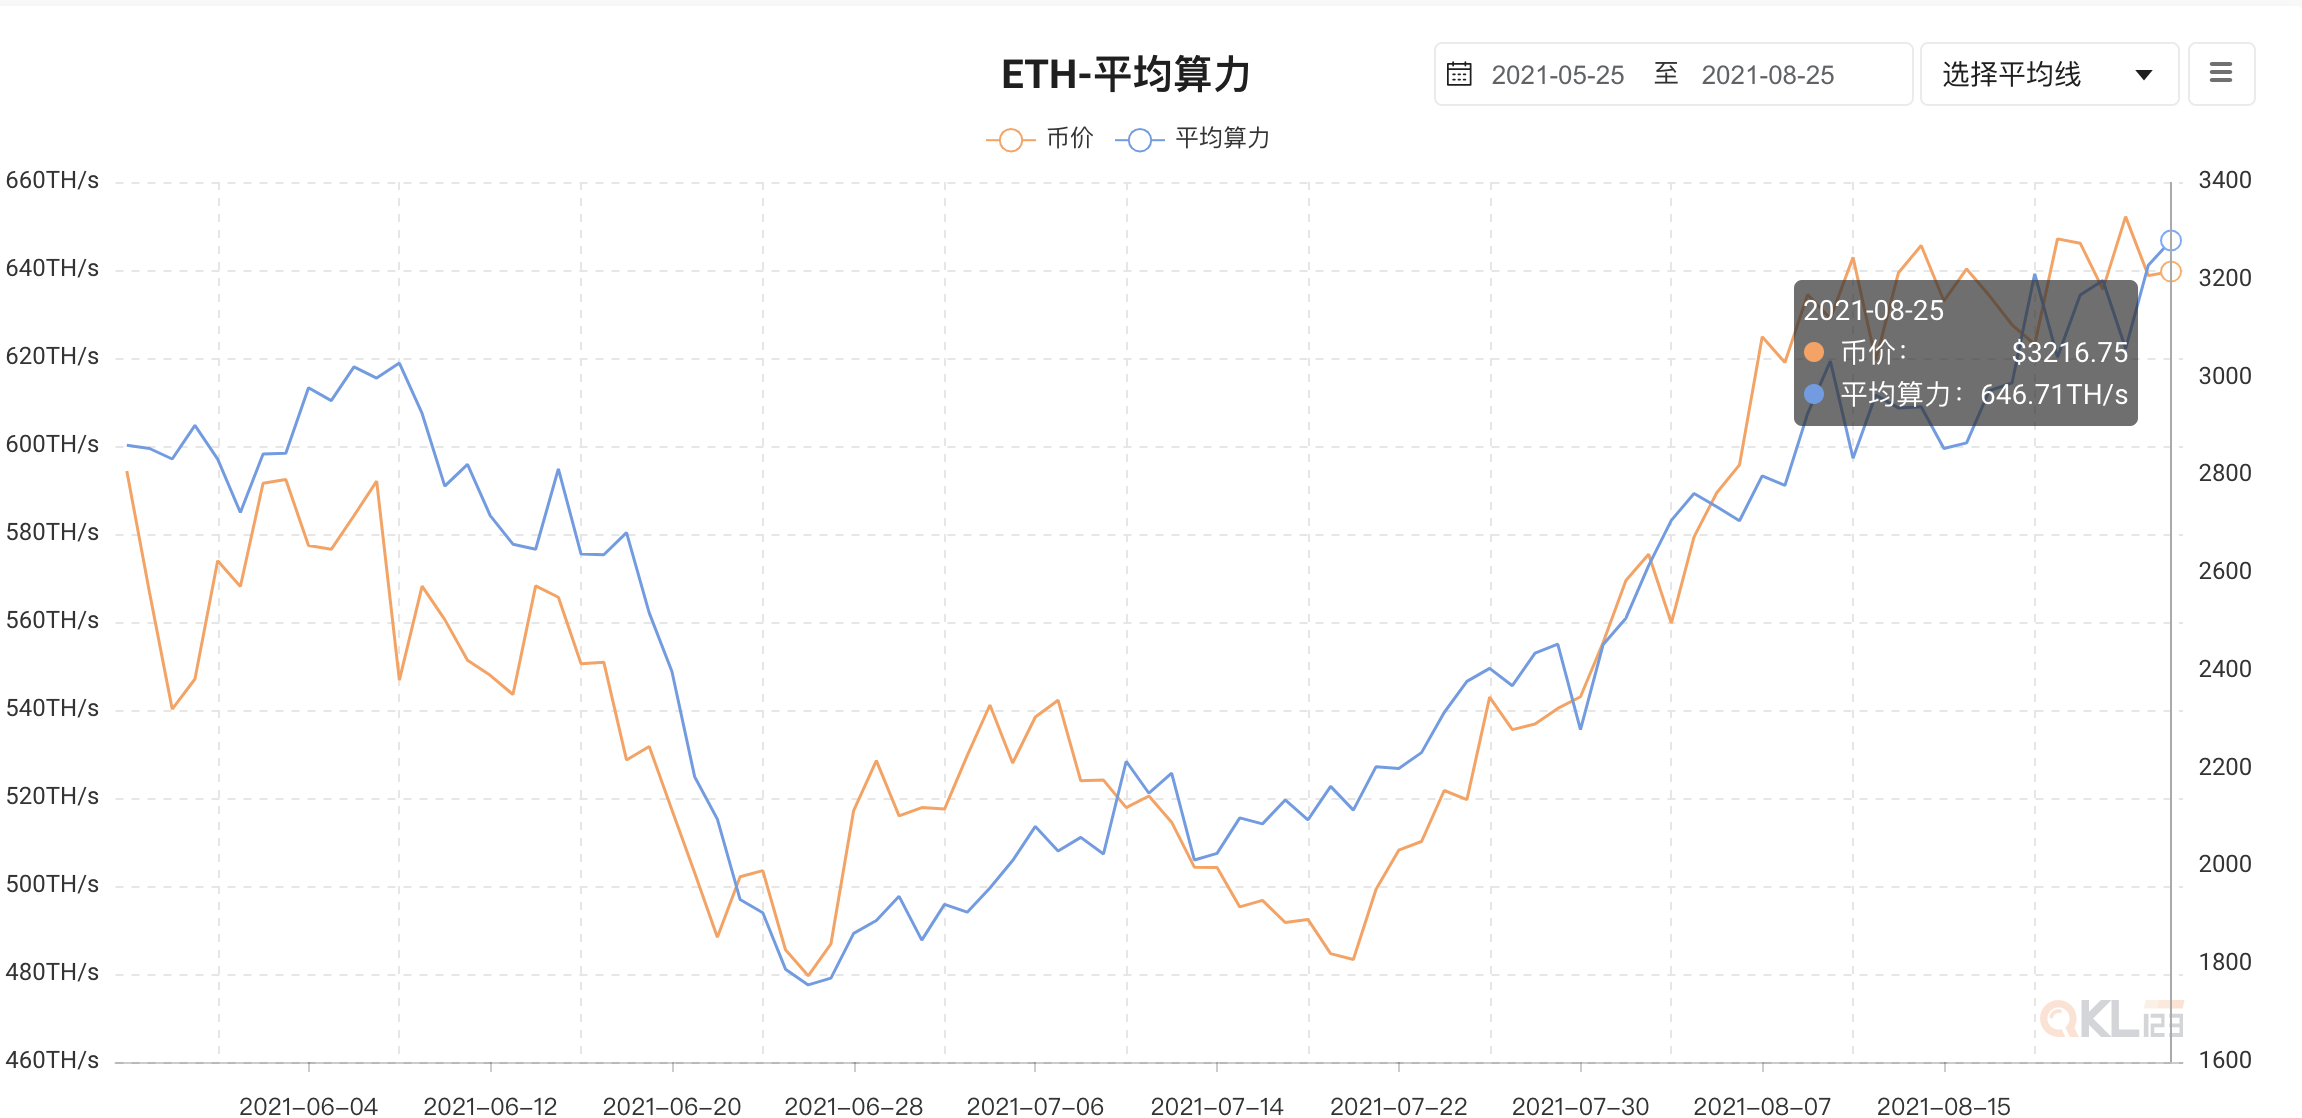 Data:8month25The computing power of Ethereum reached646.71second/Seconds, a record high